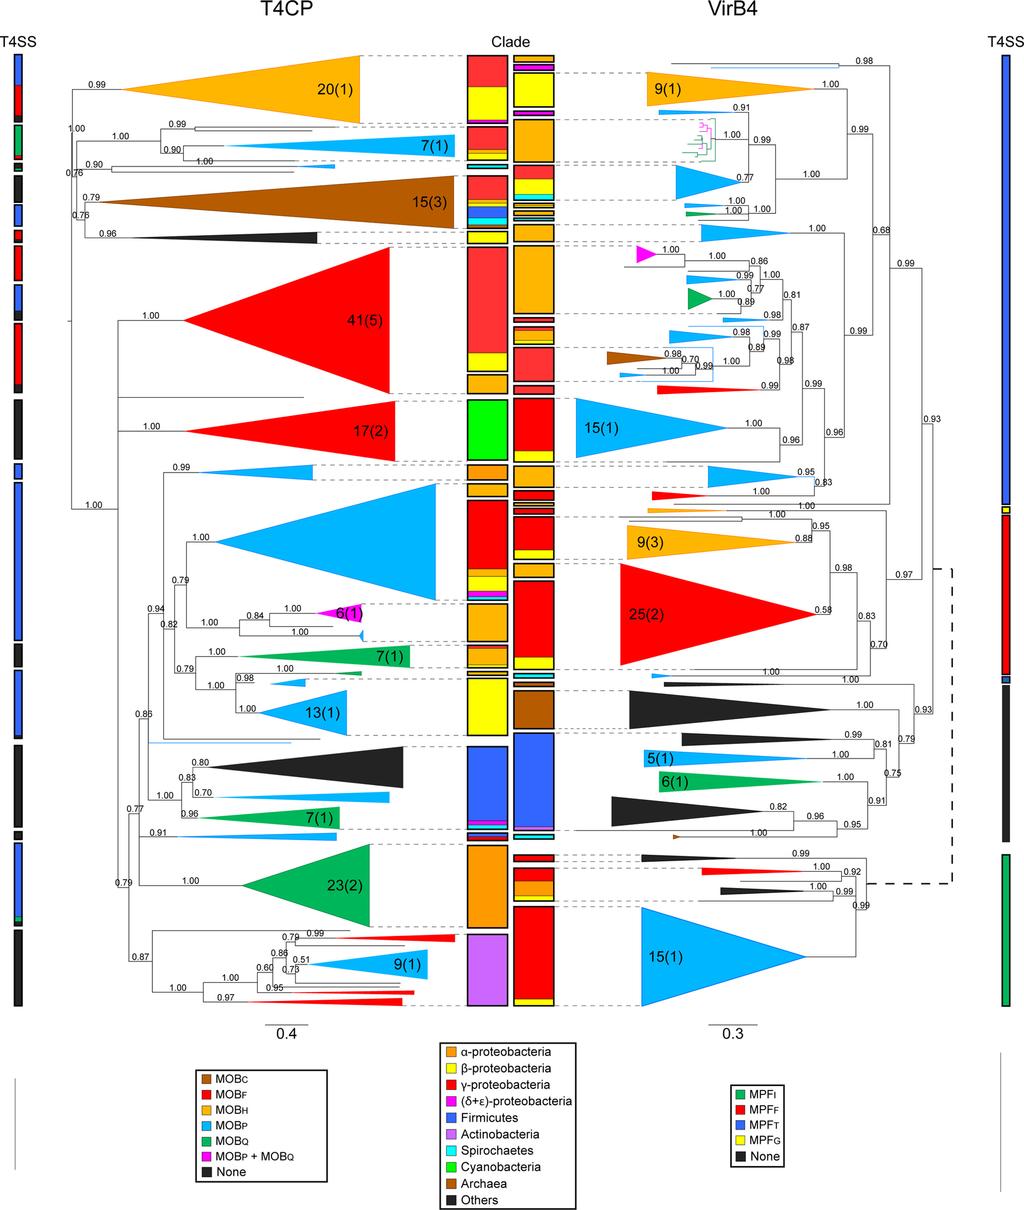 FIG. 10. Phylogenetic analysis of the T4CP family (left) compared to the T4SS main ATPase (VirB4 and TraU) (right).